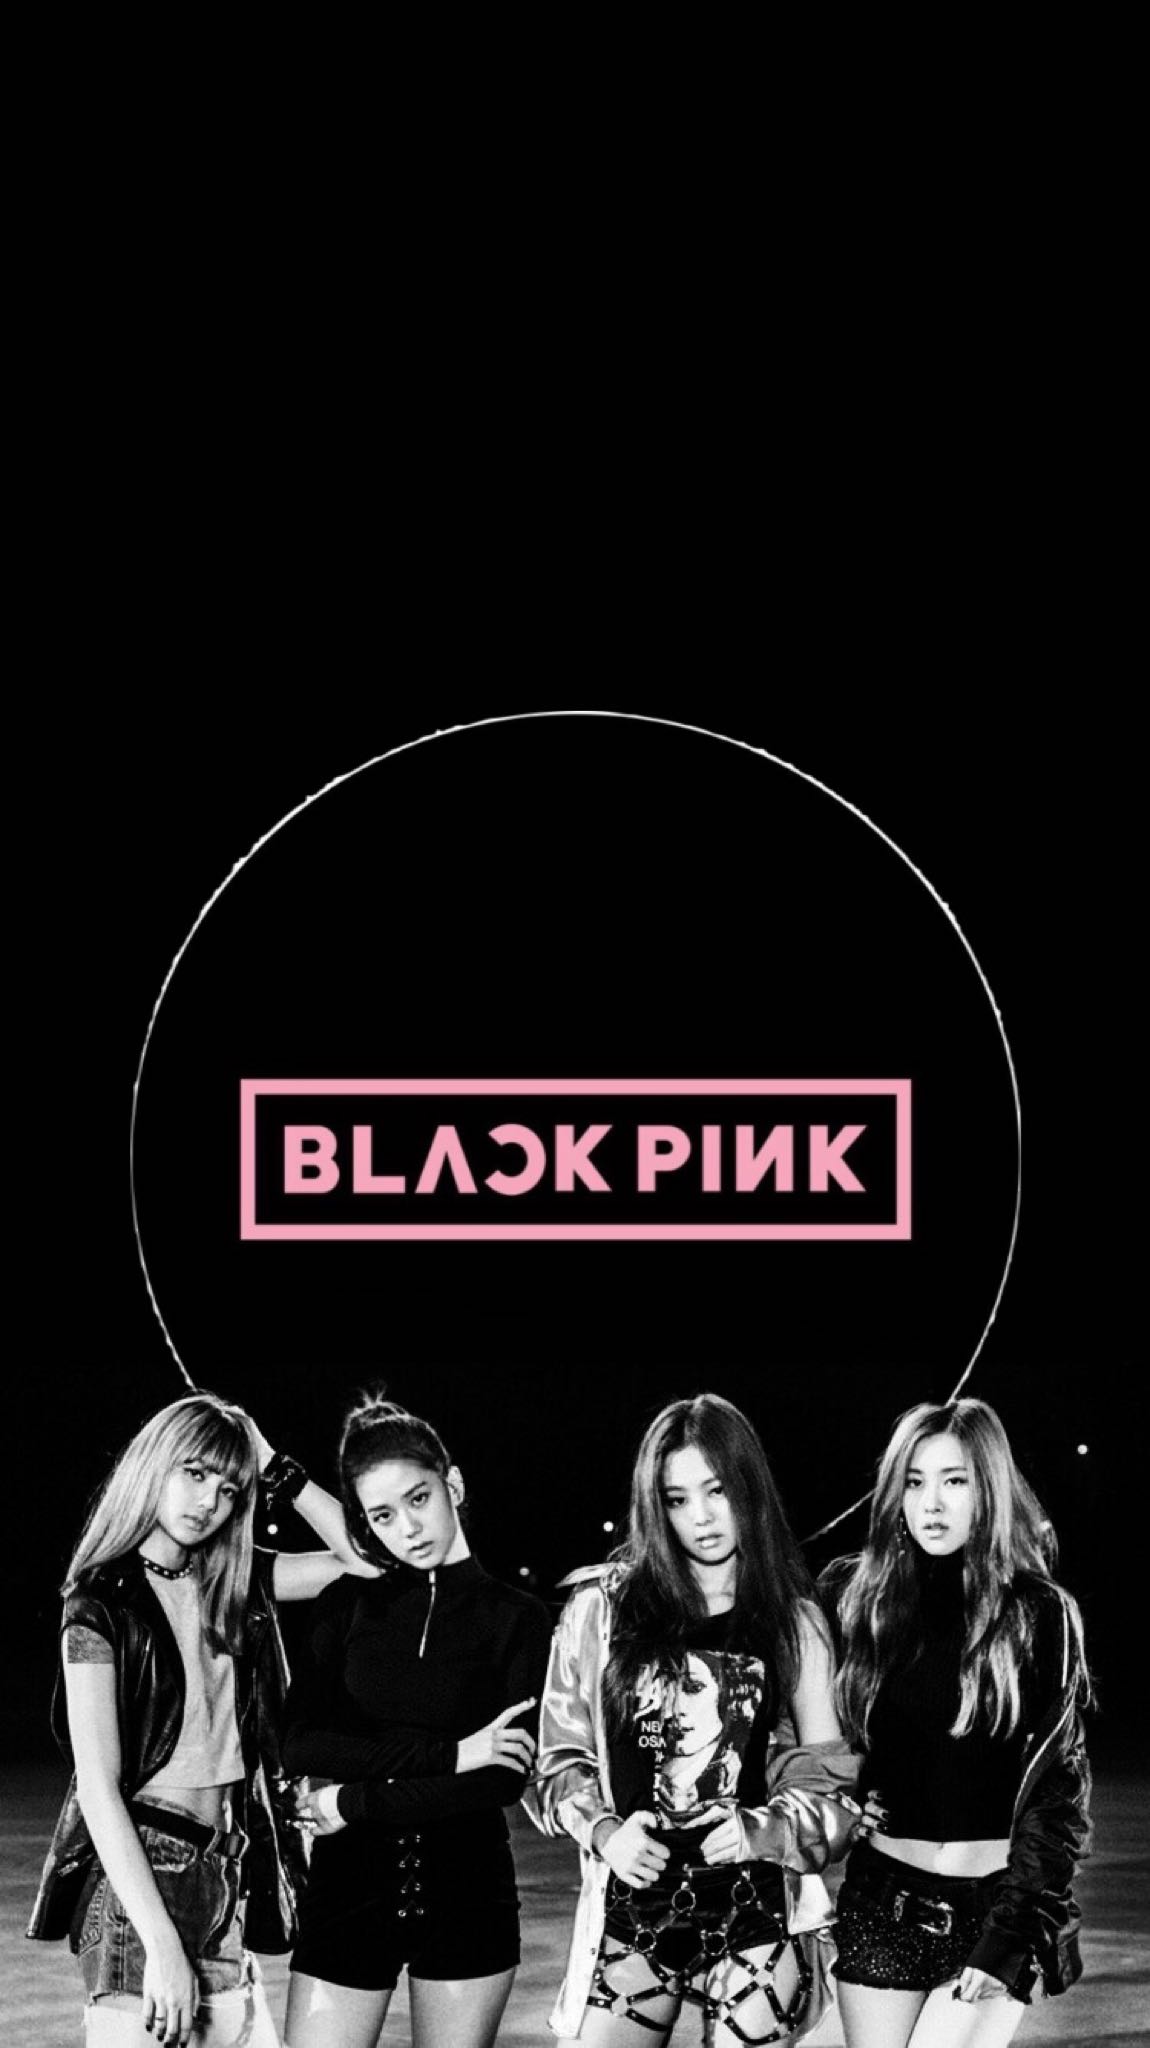 BLACKPINK Wallpaper (Optimized for iPhone)